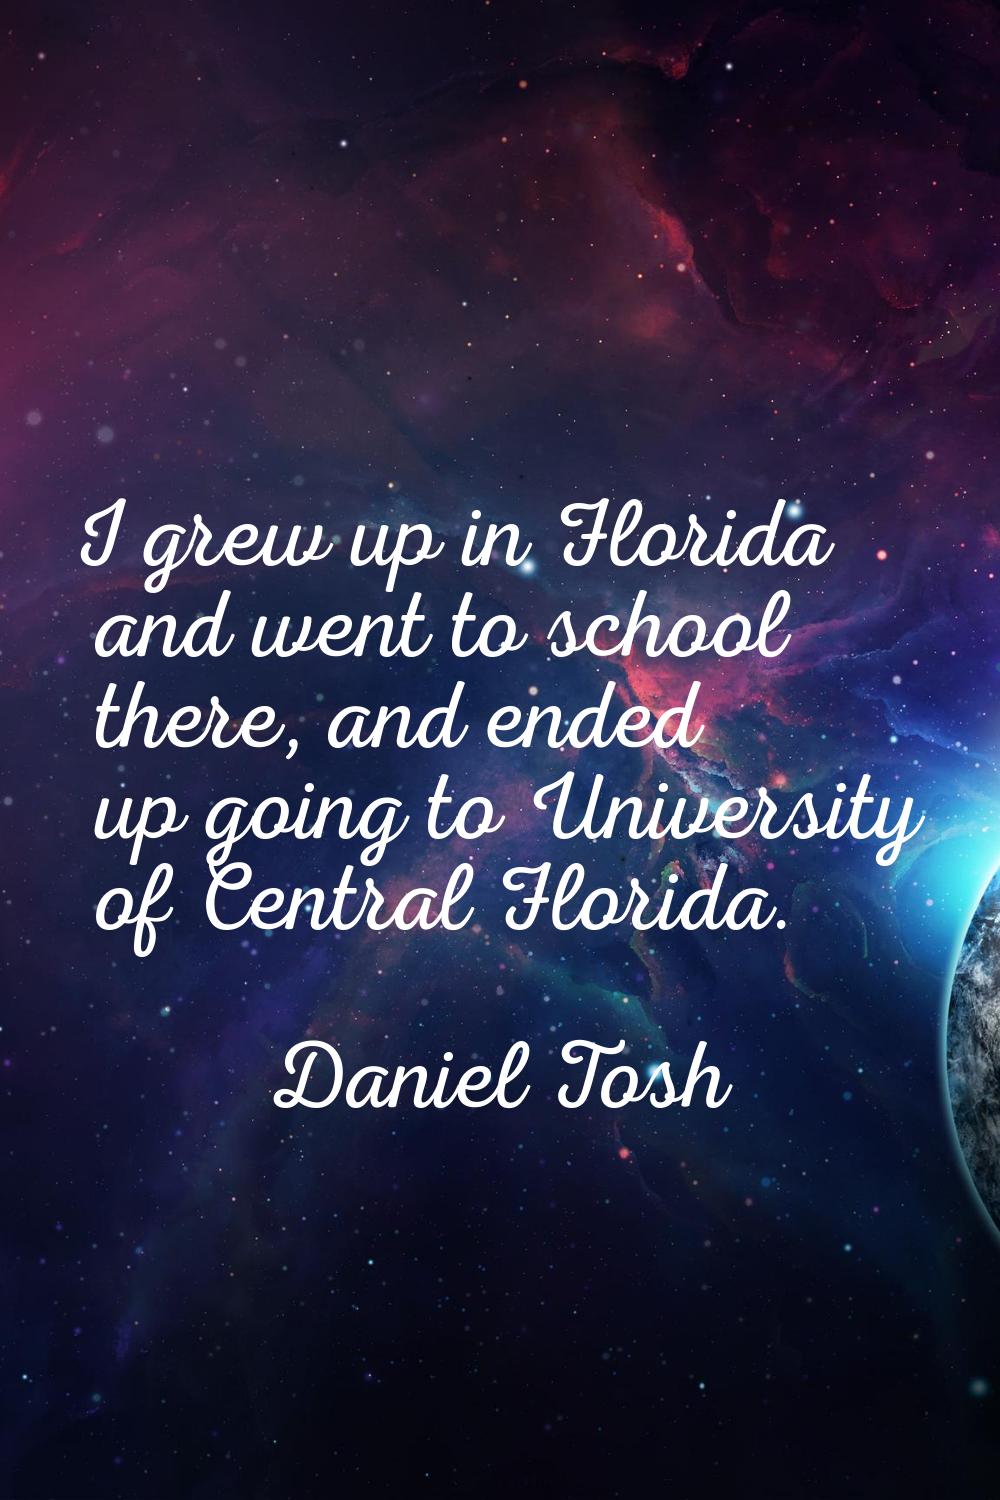 I grew up in Florida and went to school there, and ended up going to University of Central Florida.